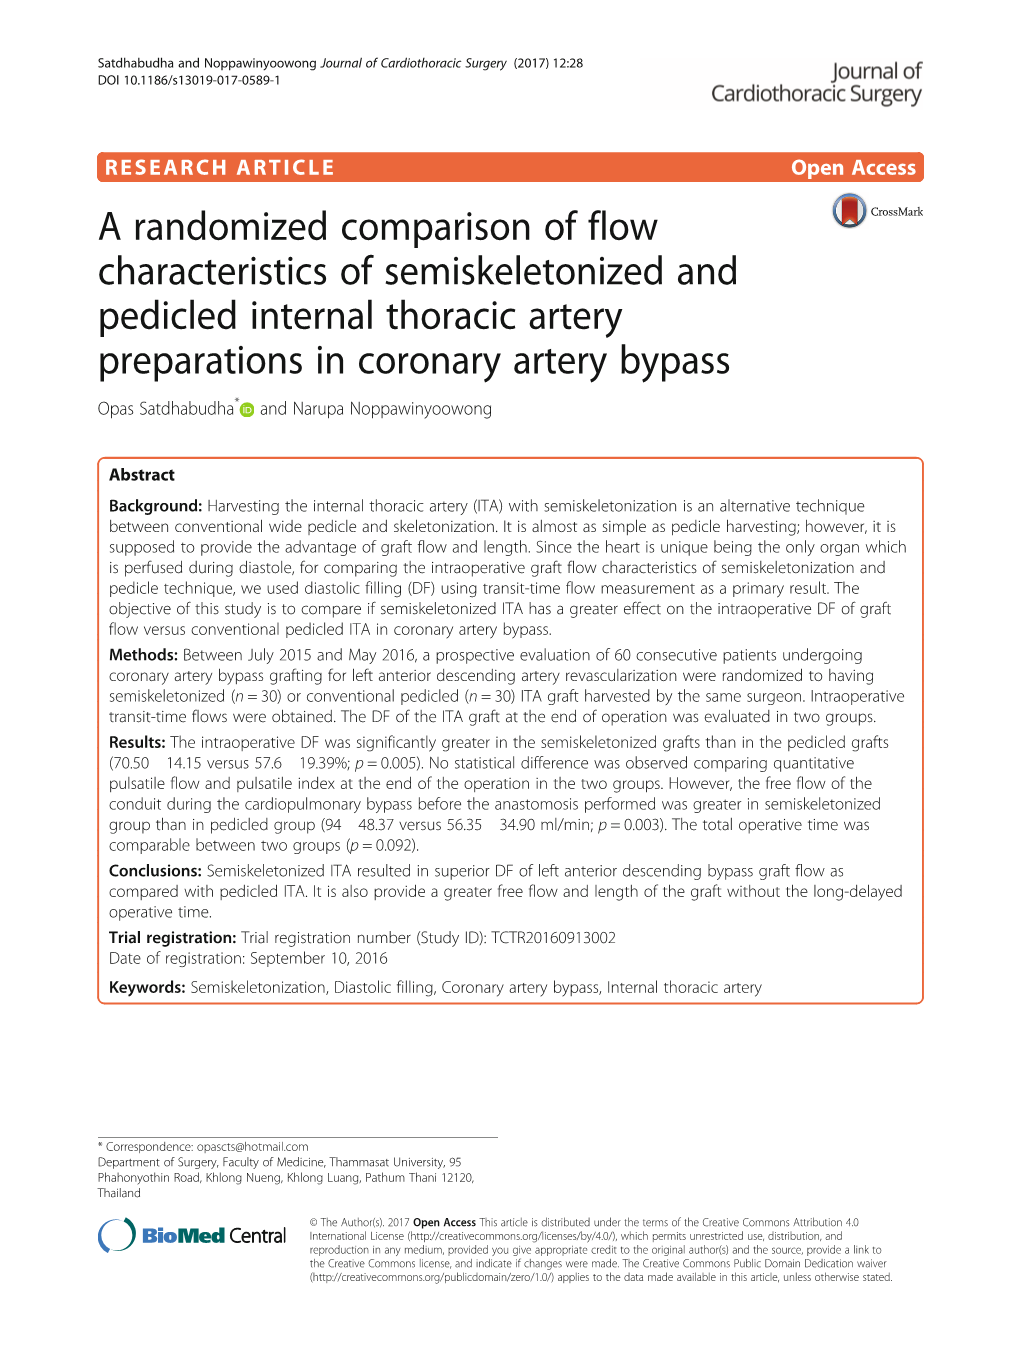 A Randomized Comparison of Flow Characteristics of Semiskeletonized and Pedicled Internal Thoracic Artery Preparations in Corona